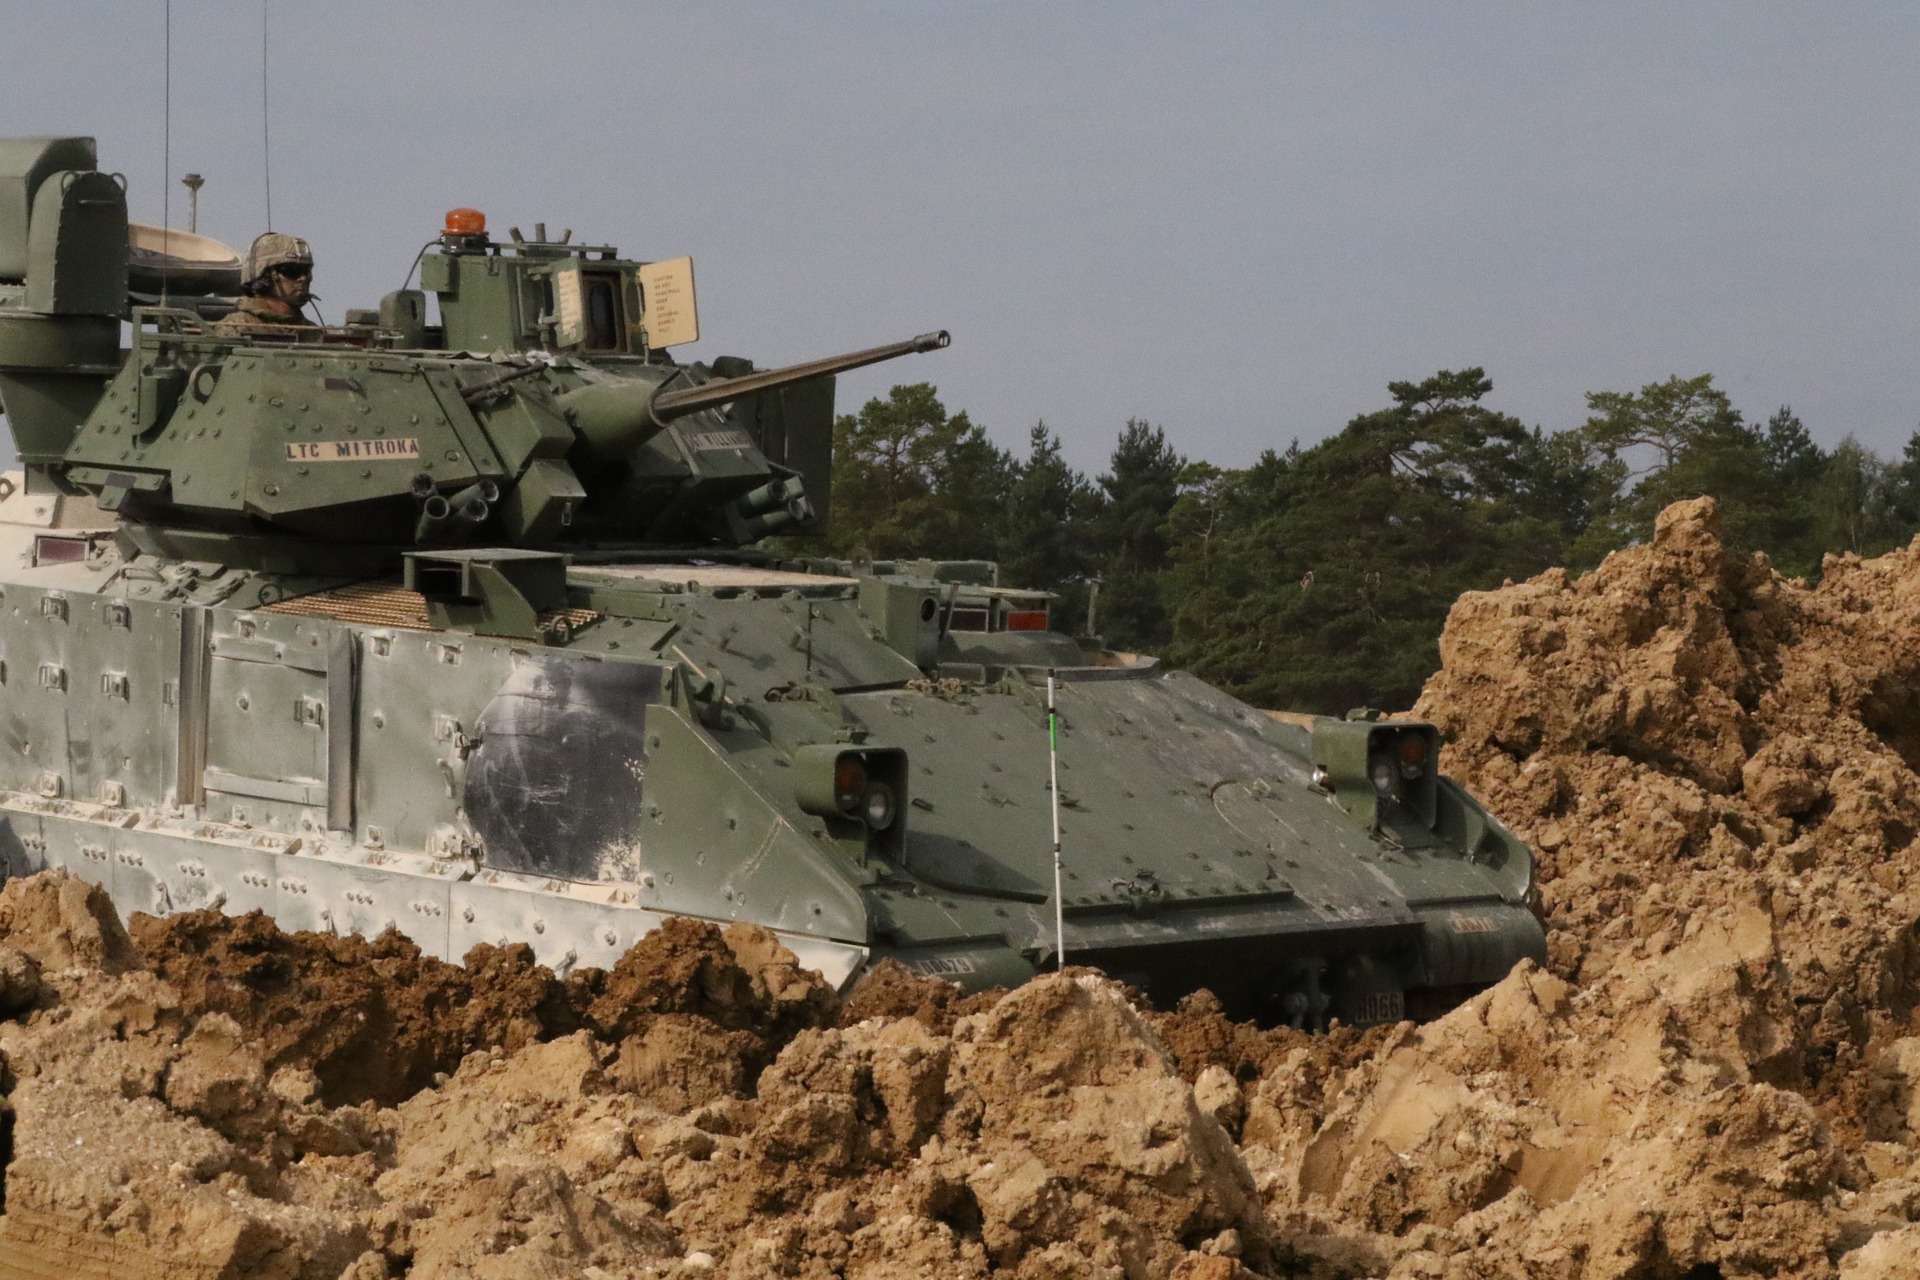 What is a Bradley Fighting Vehicle and what does it do?